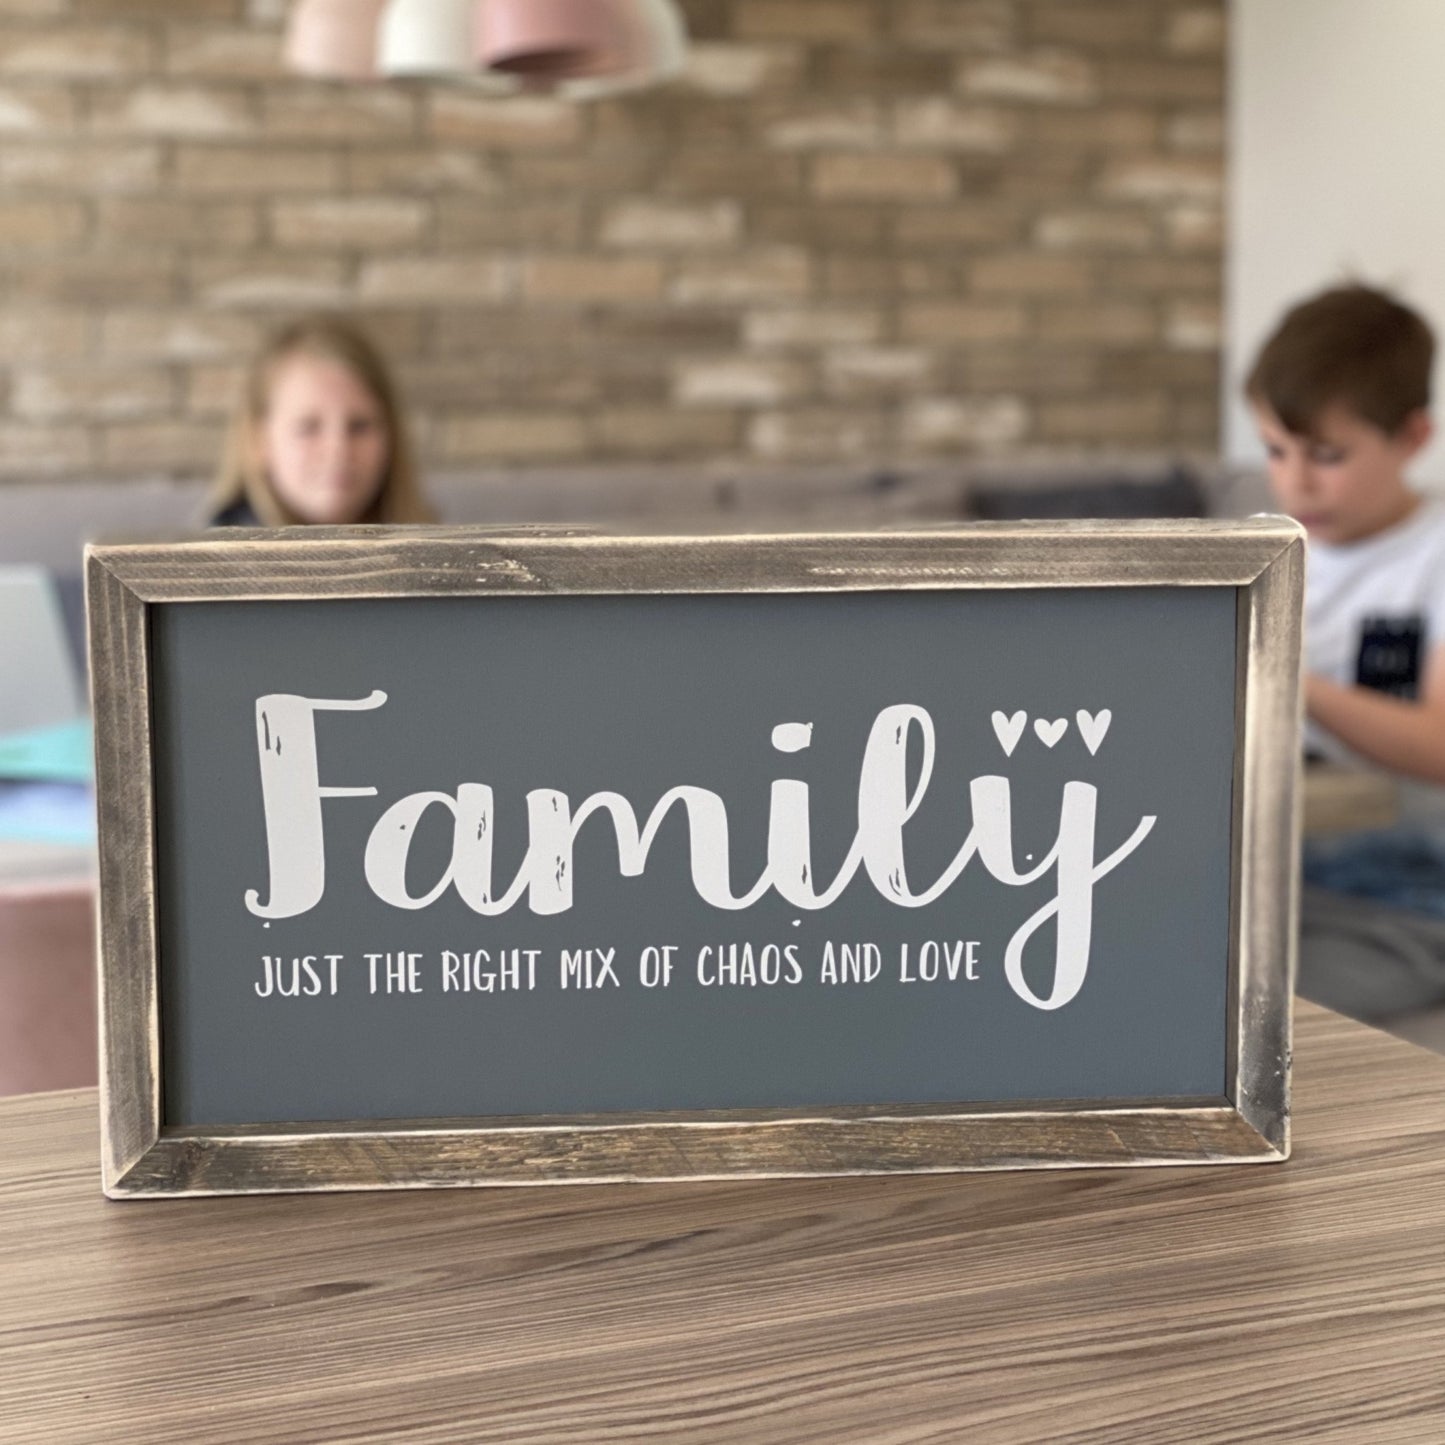 Family - just the right mix of chaos & love | Framed wood sign | #BrainTumourResearch - The Imperfect Wood Company - Framed Wood Sign